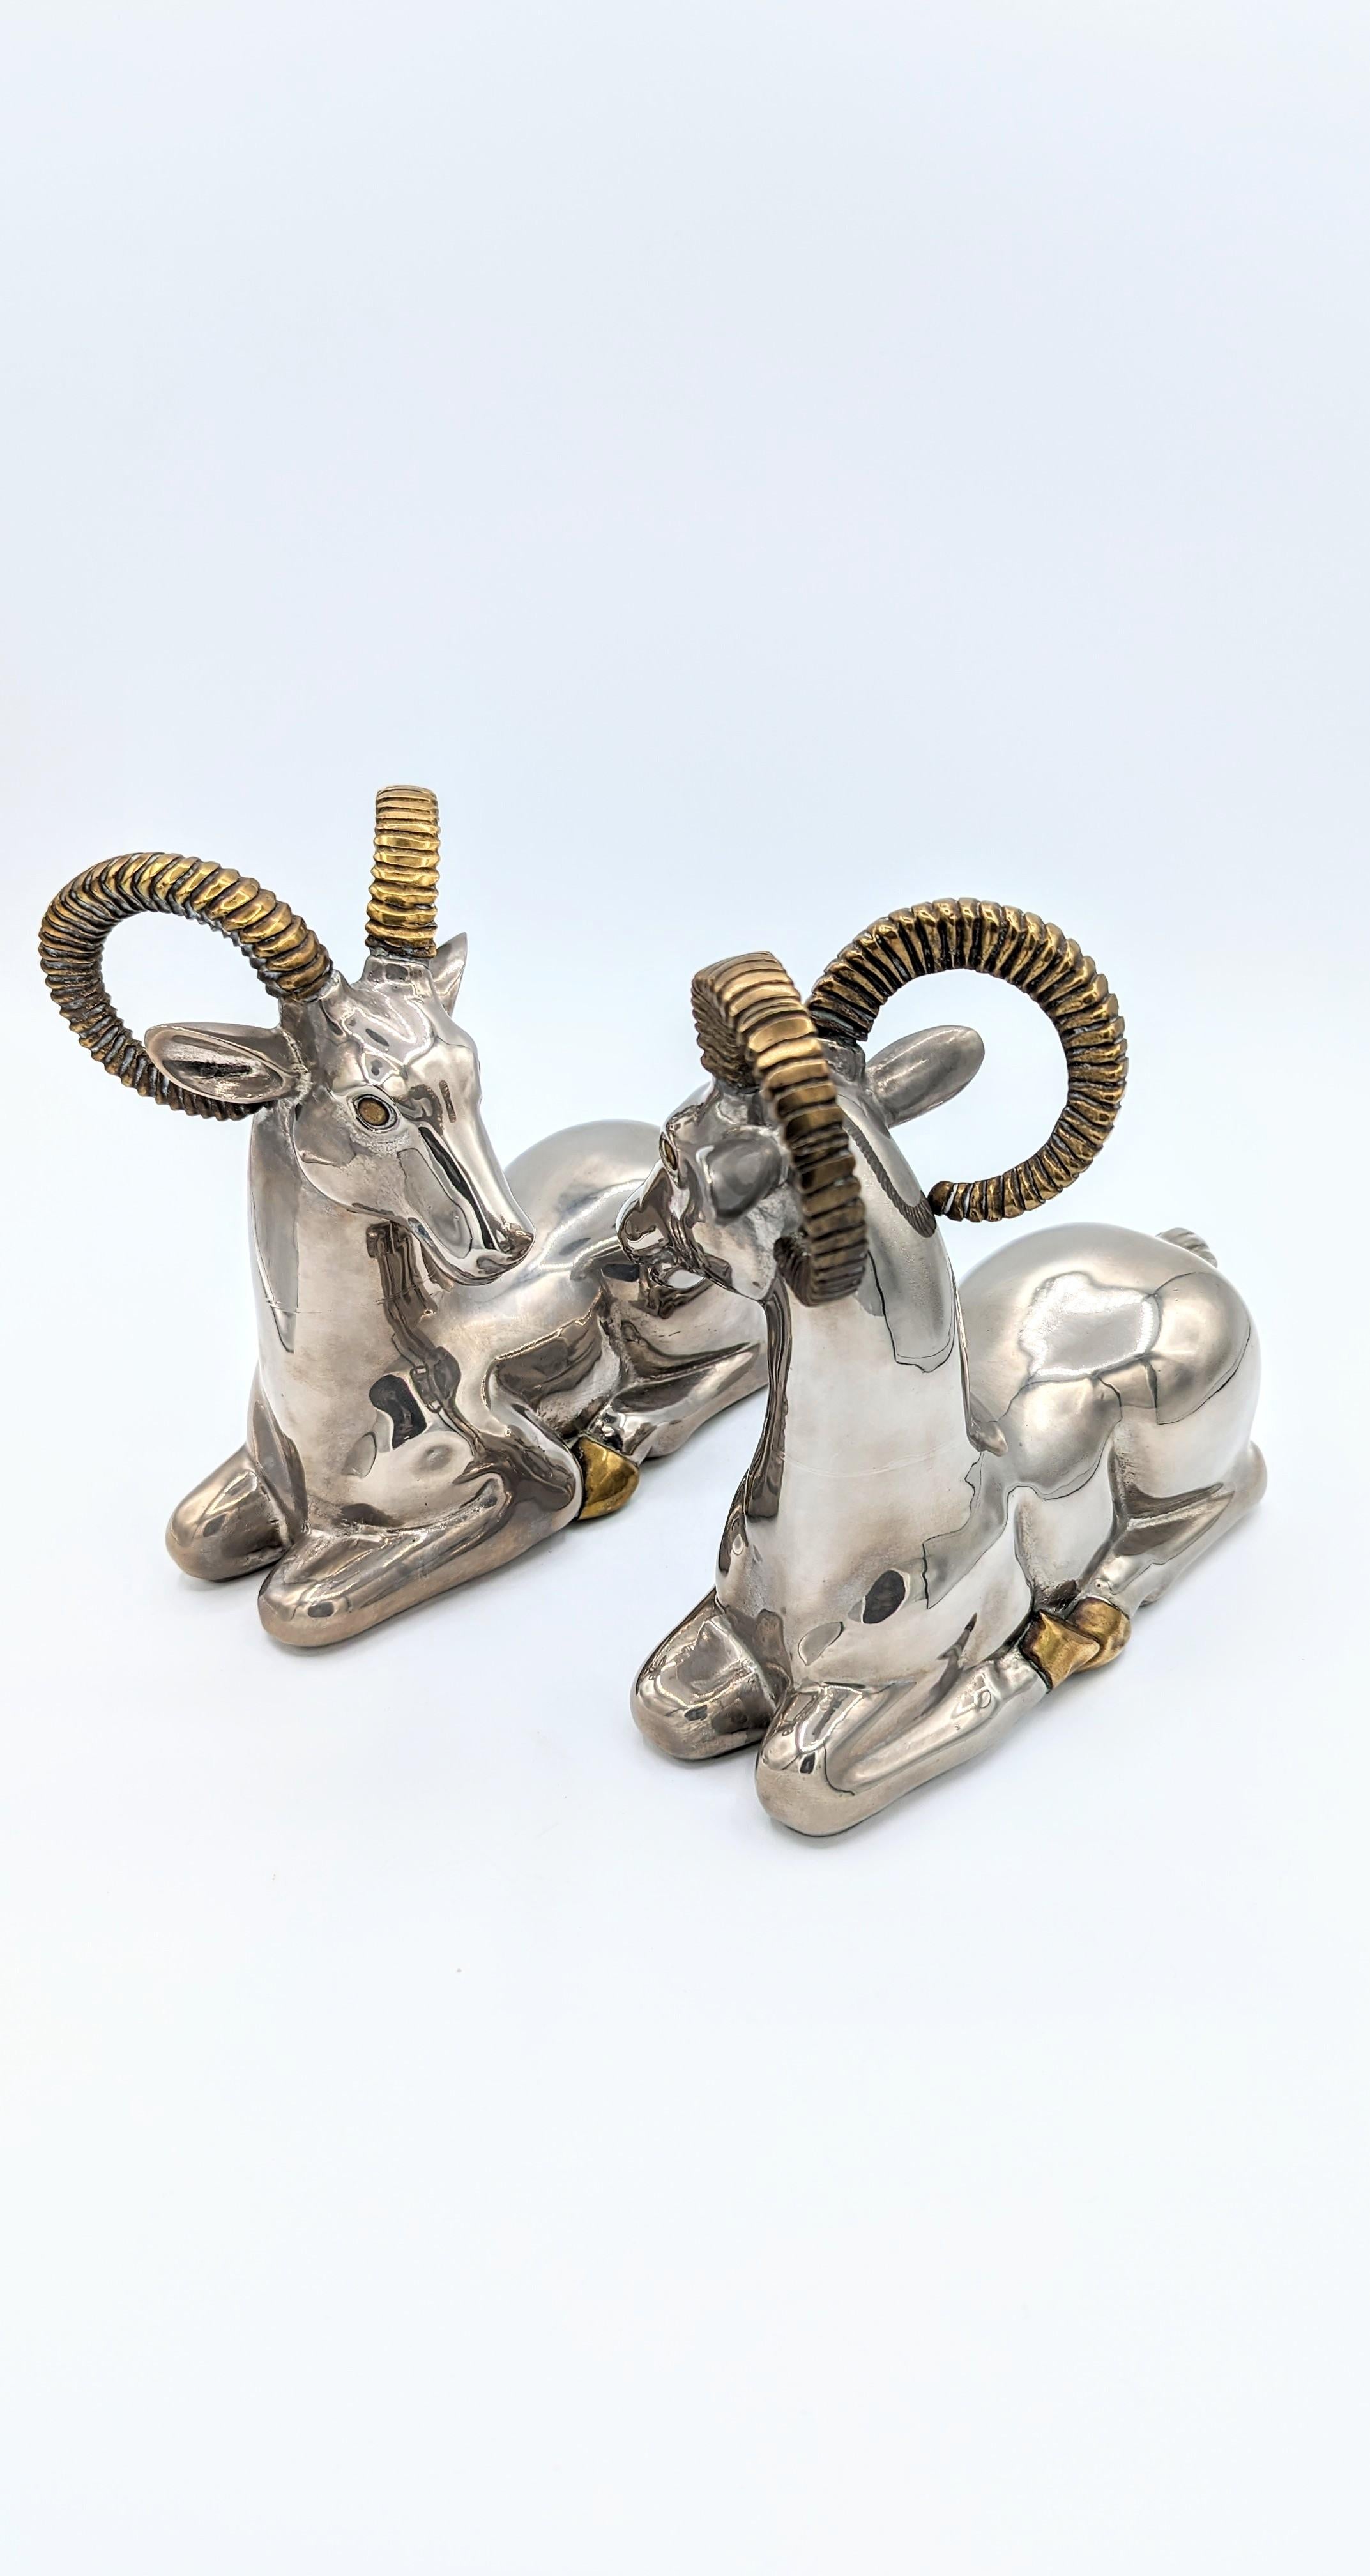 Rare pair of ram Bookends in mixed metal chrome and brass, manufactured in France in 1970s. Really very decorative objects, you can use them as a bookend but also as decorative sculptures on a piece of furniture or a table. Of the nicest effect